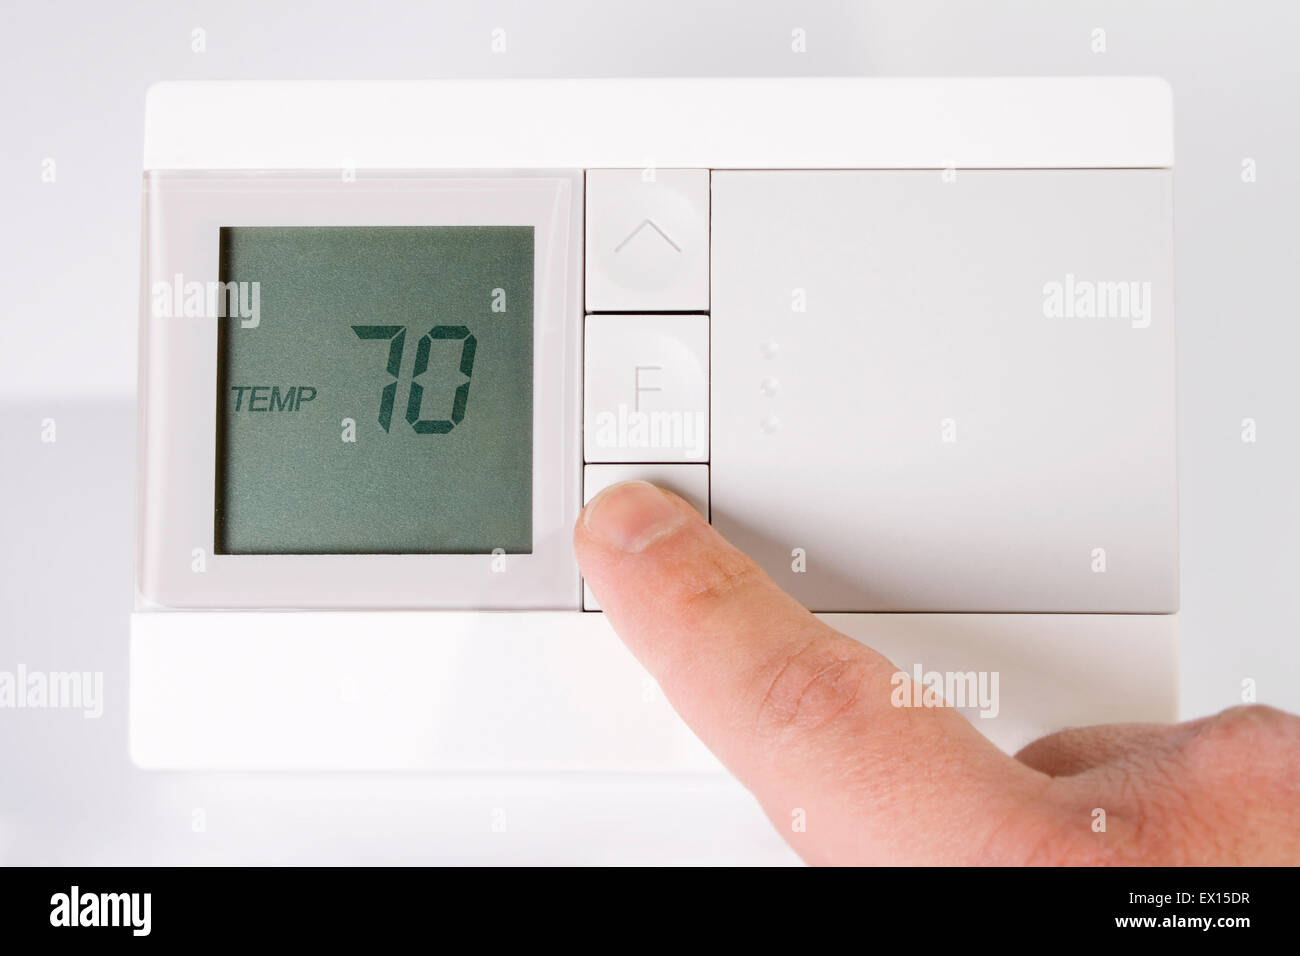 Stock image of hand adjusting thermostat Stock Photo